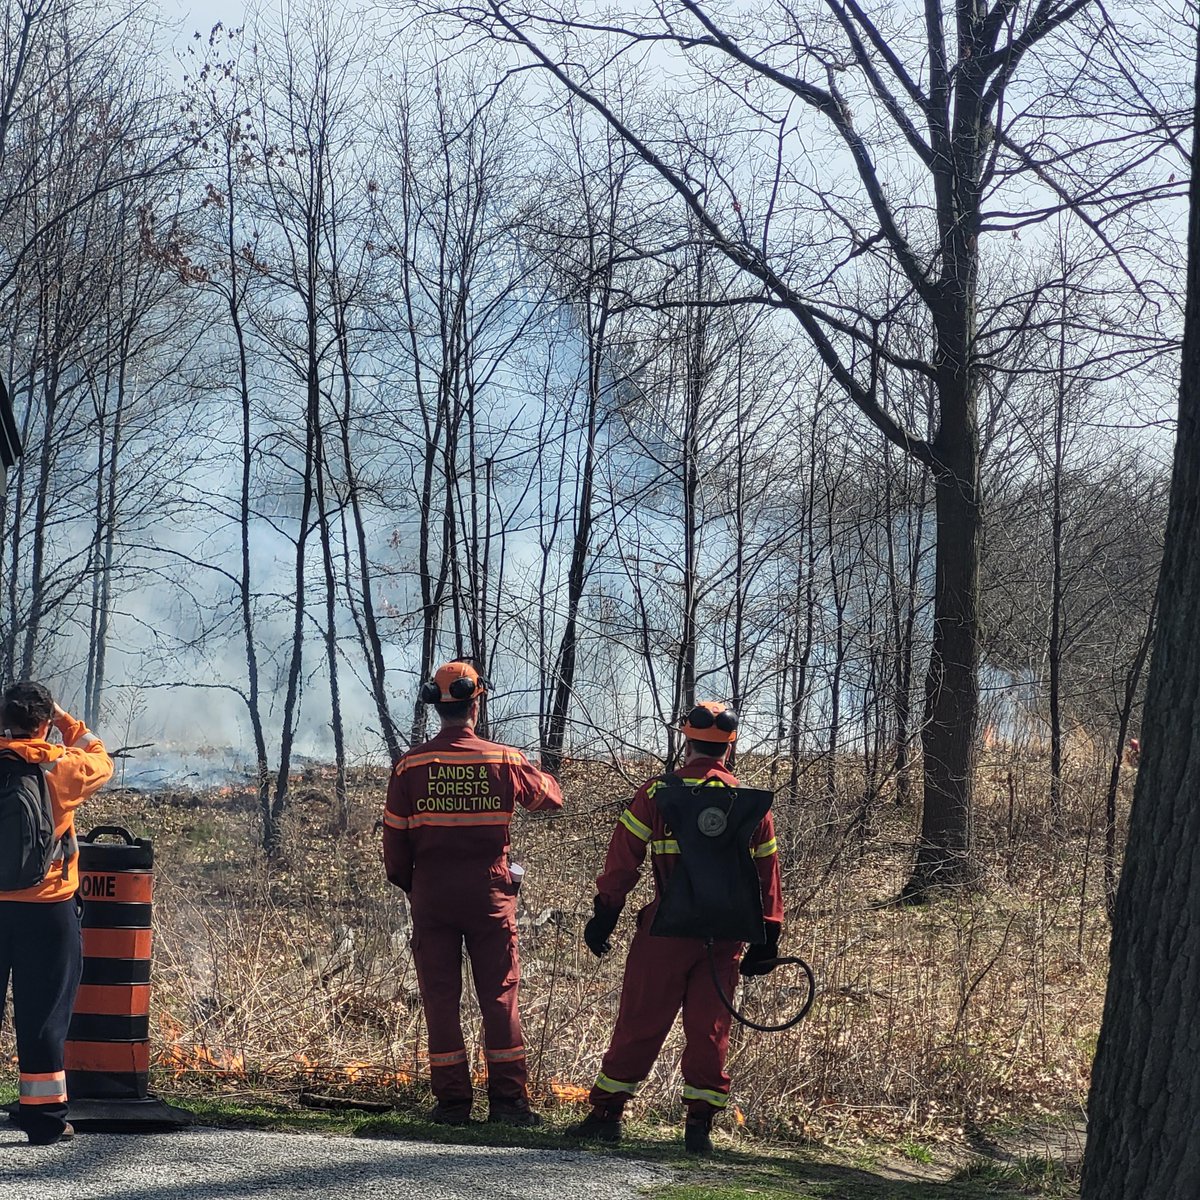 Our CEO, Jess Kaknevicius, attended today's prescribed burn at High Park. Organized by @cityoftoronto, Indigenous Land Stewardship Circle & @landsandforests, it beautifully weaved Indigenous cultural ceremony & western science to support regeneration & connect with the earth.